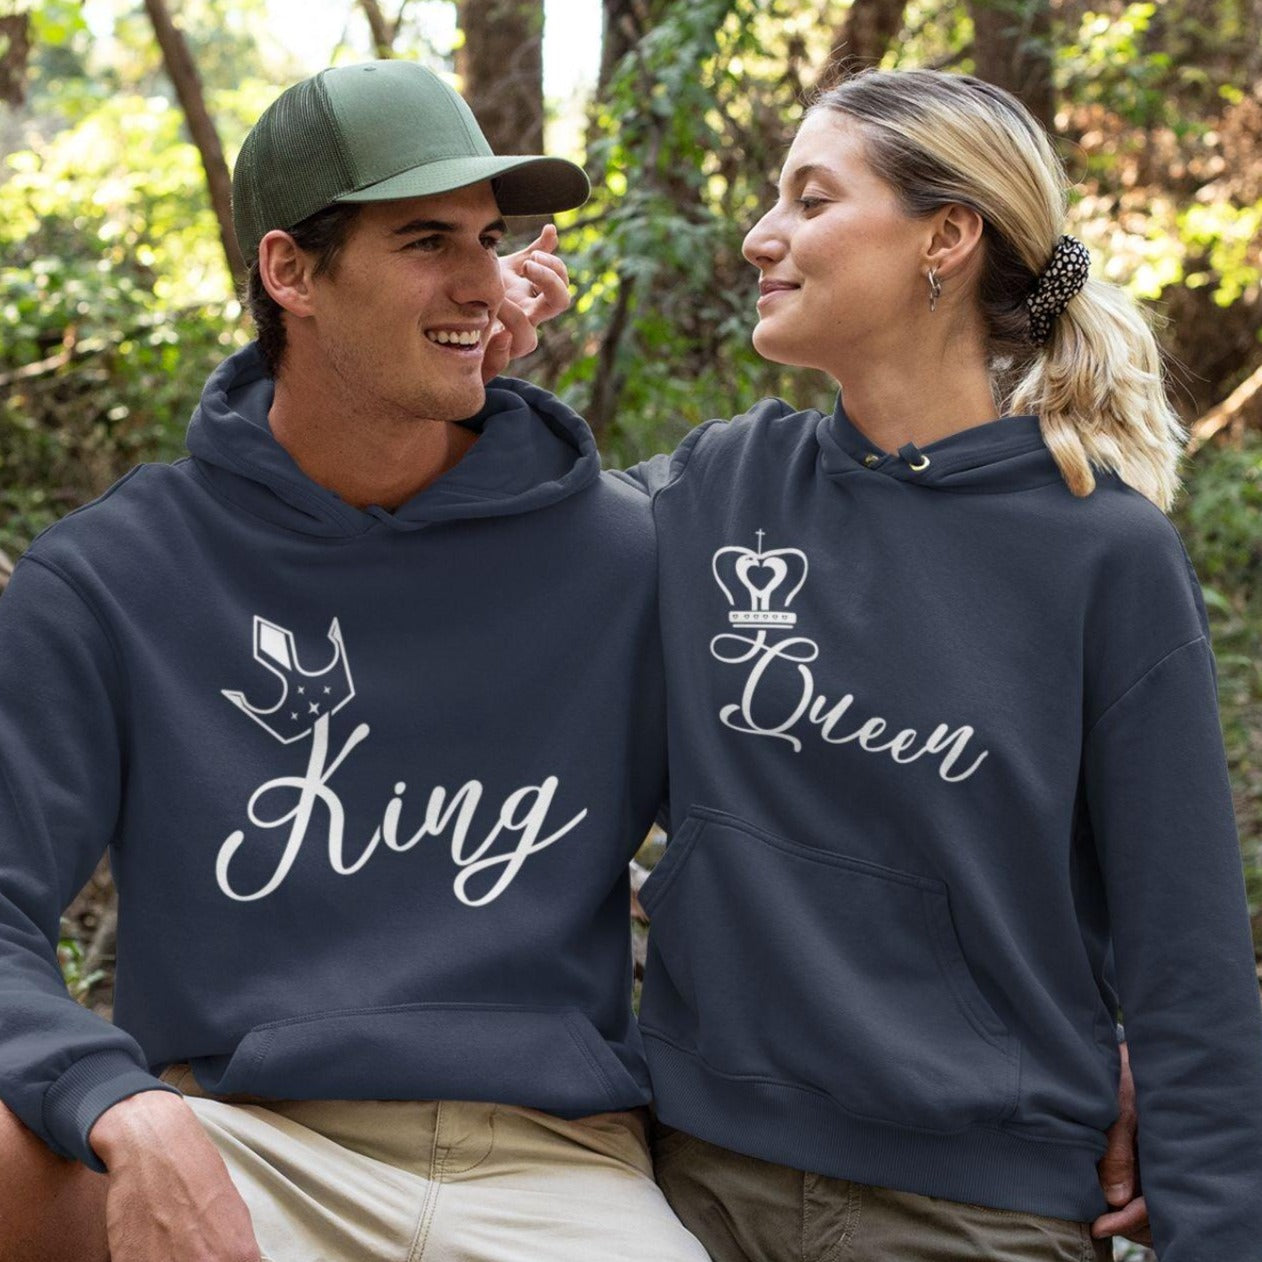 His & Hers Matching Set: King & Queen Couple Outfits & Sweatshirts - 4Lovebirds